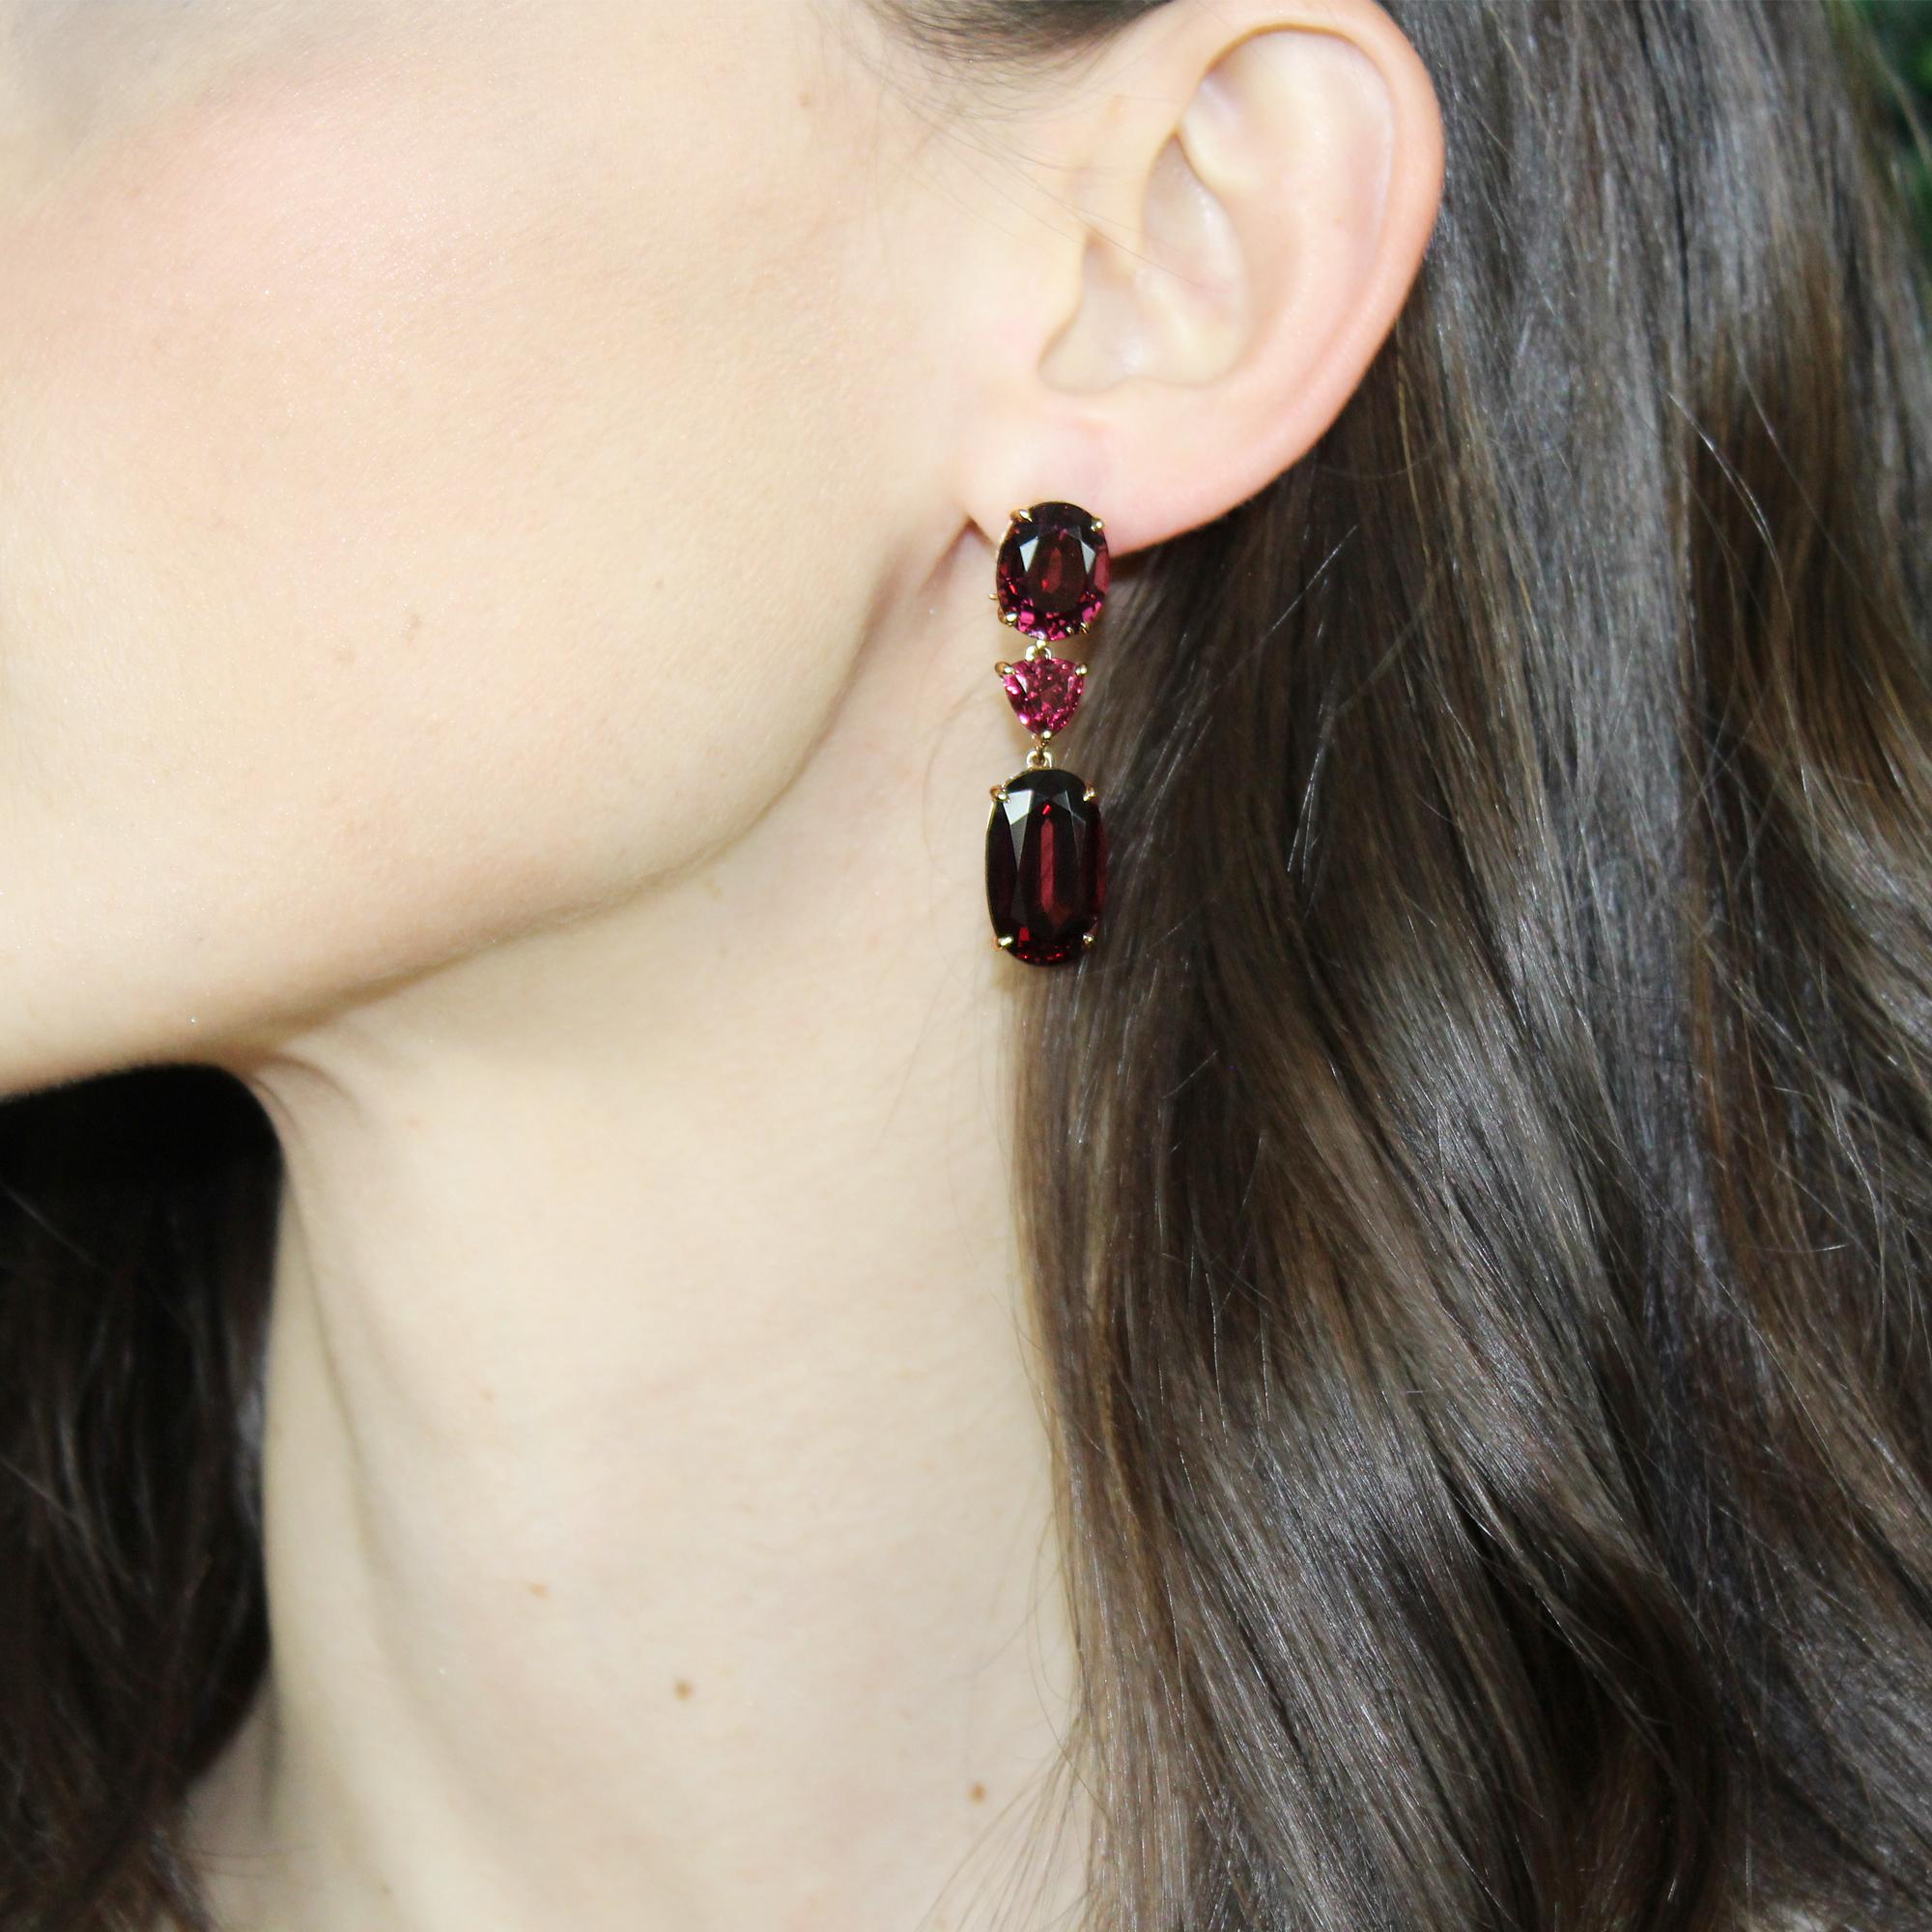 One-of-a-kind oval and trillion-shaped three stone rhodolite garnet earrings set in 18 karat rose gold with pave-set round, brilliant diamonds.

The weight of each earring will not pull down the ear and is designed specifically for maximum comfort.